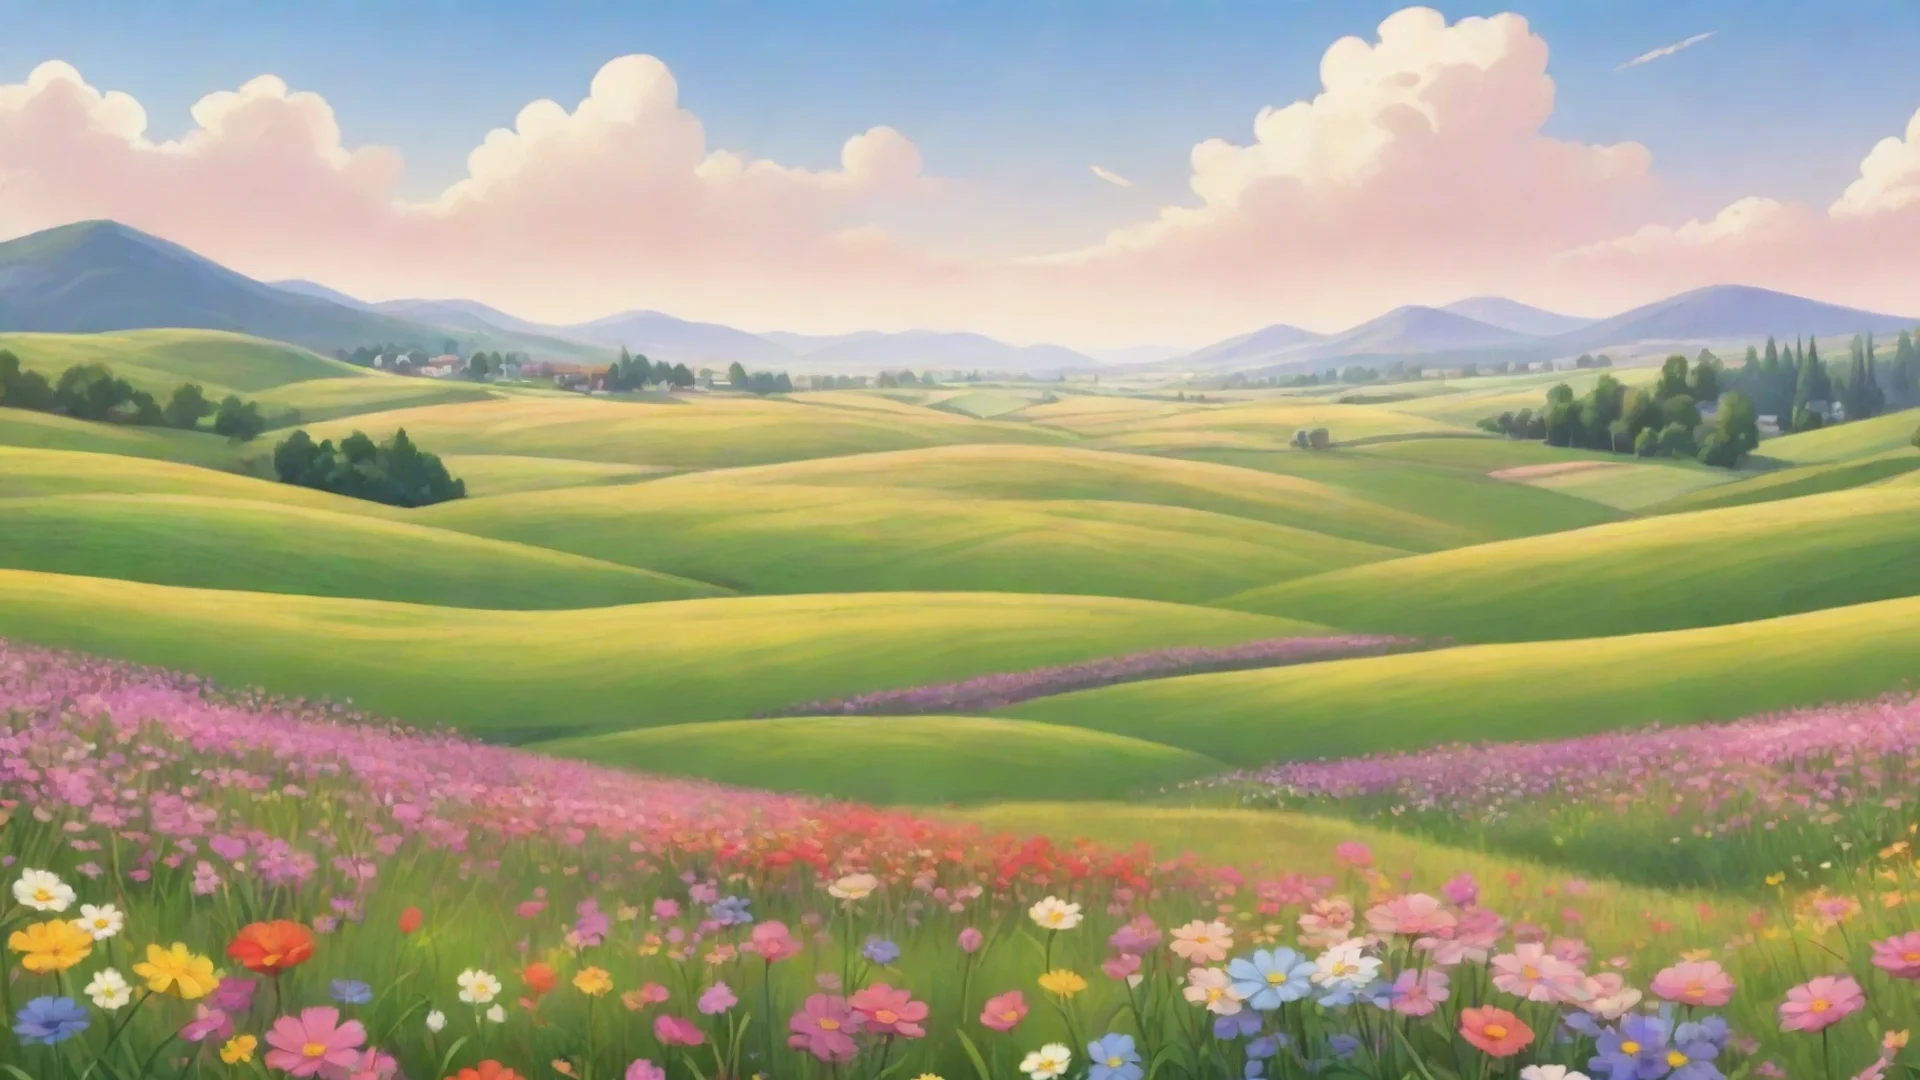 aiamazing background sweeping landscape fields of flowers peaceful relaxing cartoon realisism hd awesome portrait 2 wide